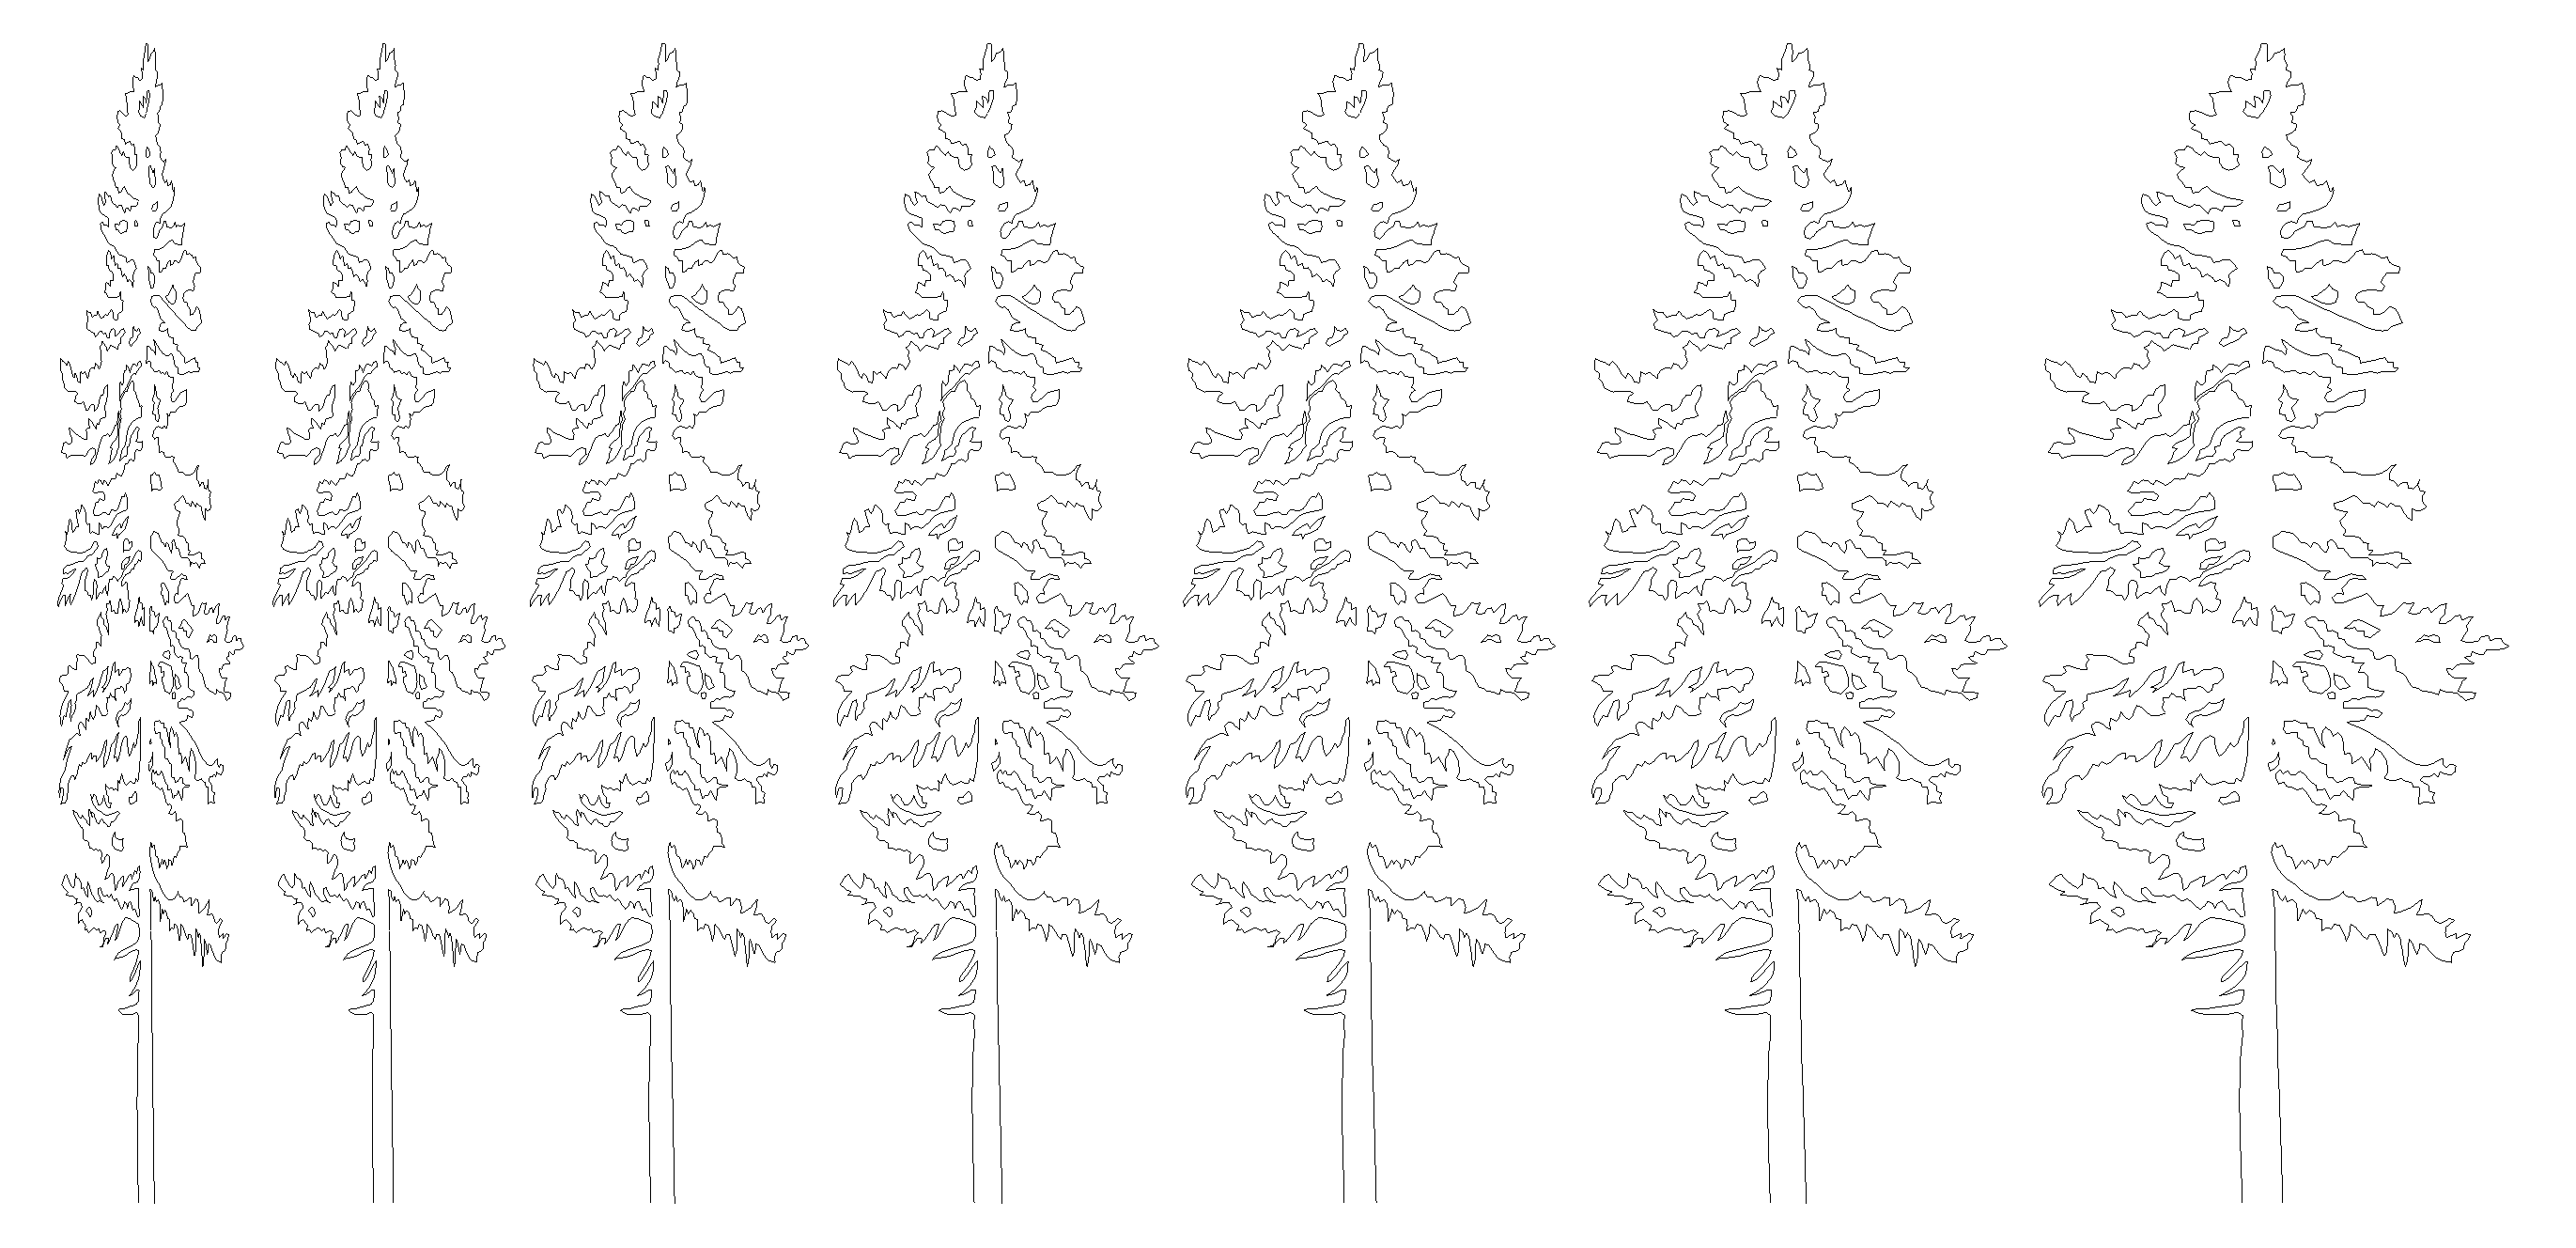 Revit elevation showing how crown diameter values affect aspect ratio for nested elevation DWG.